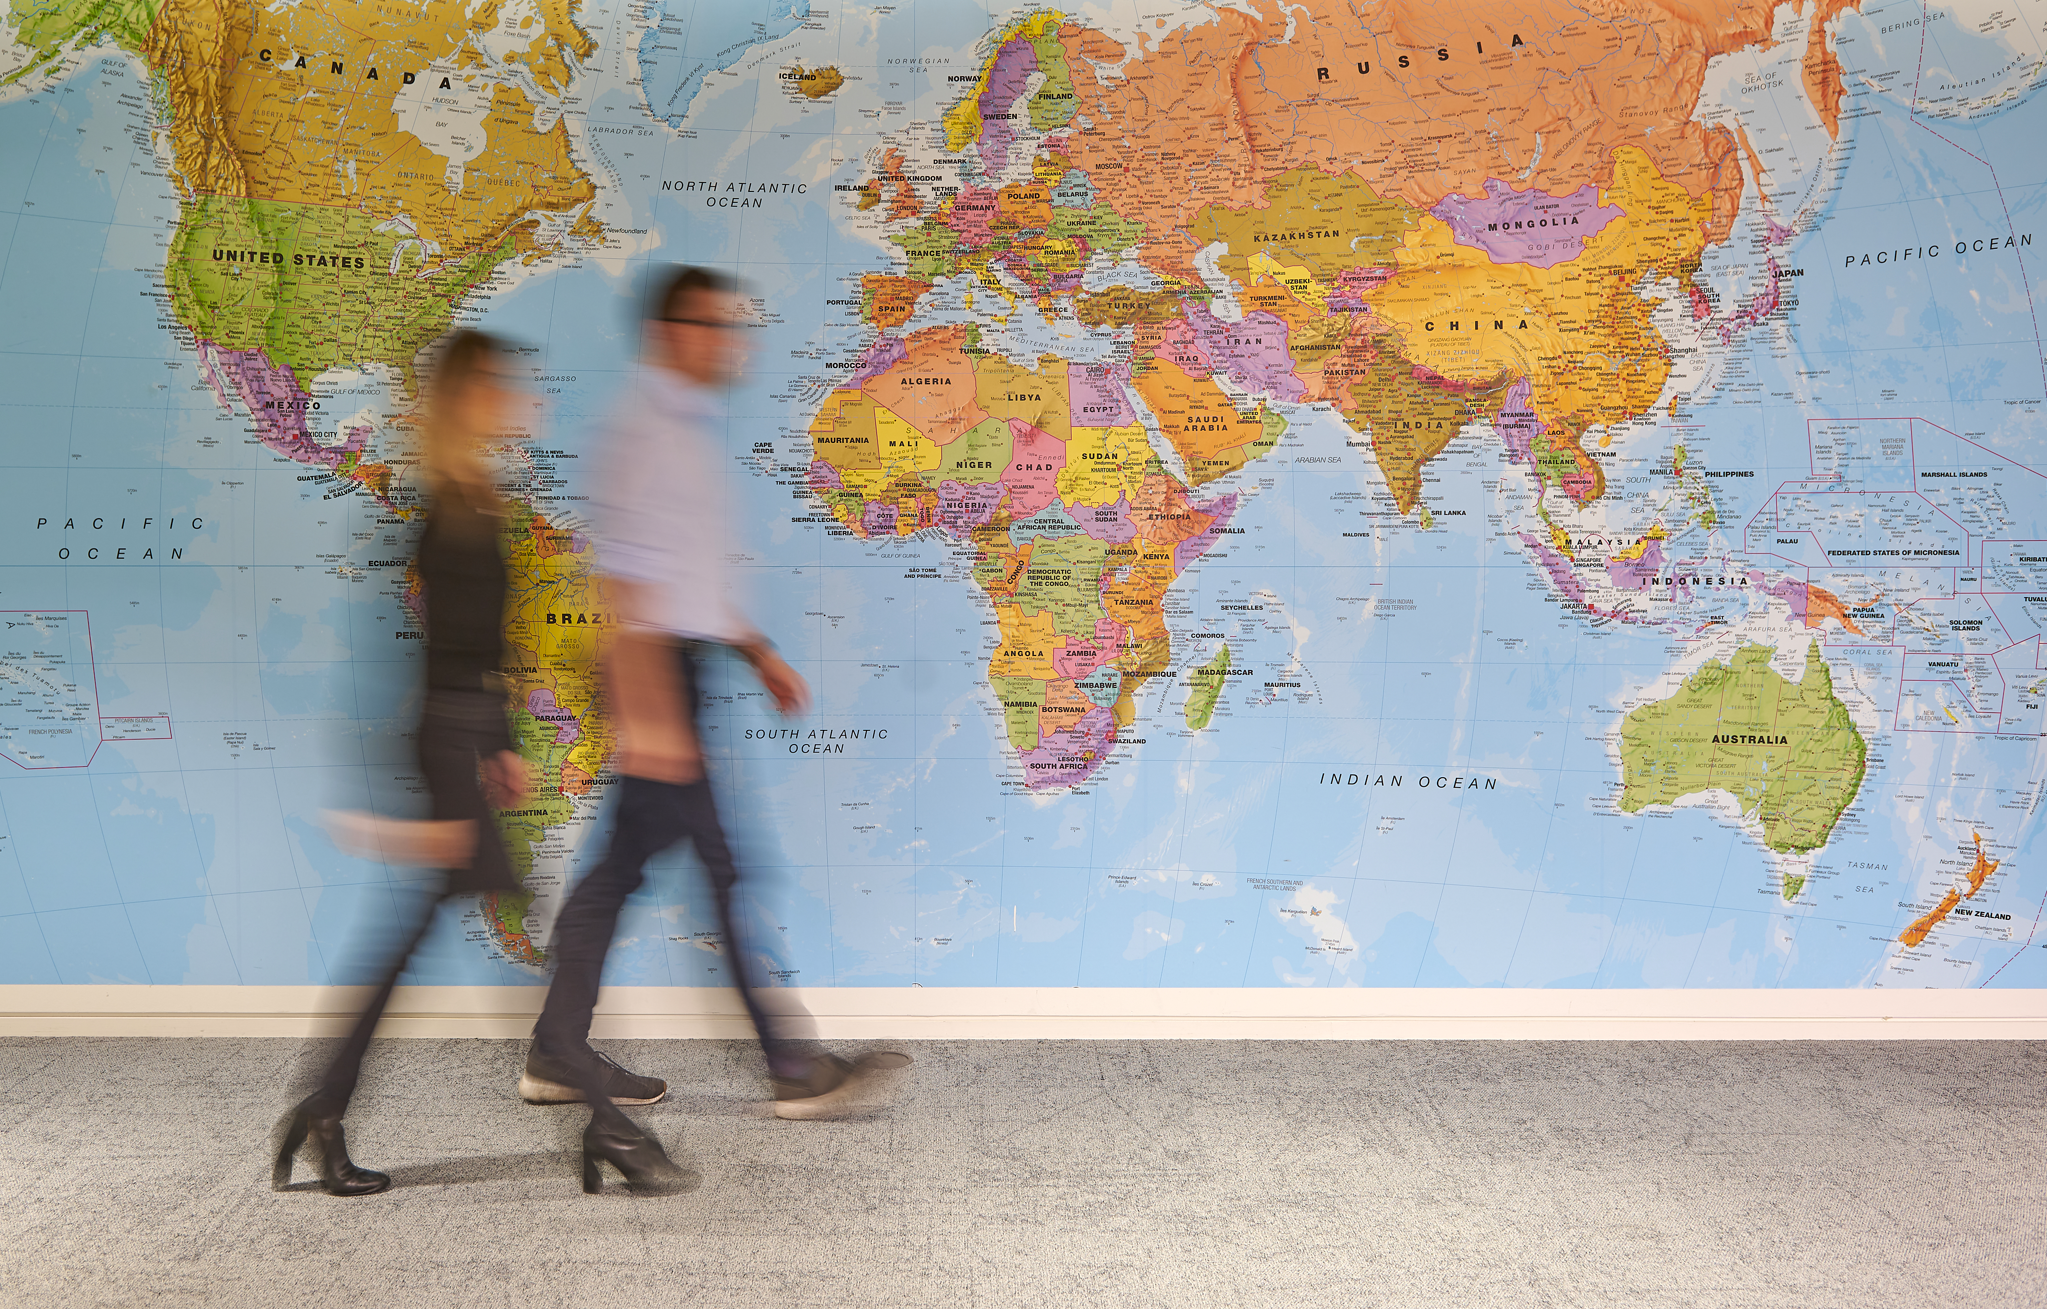 Two people walking in front of a world map